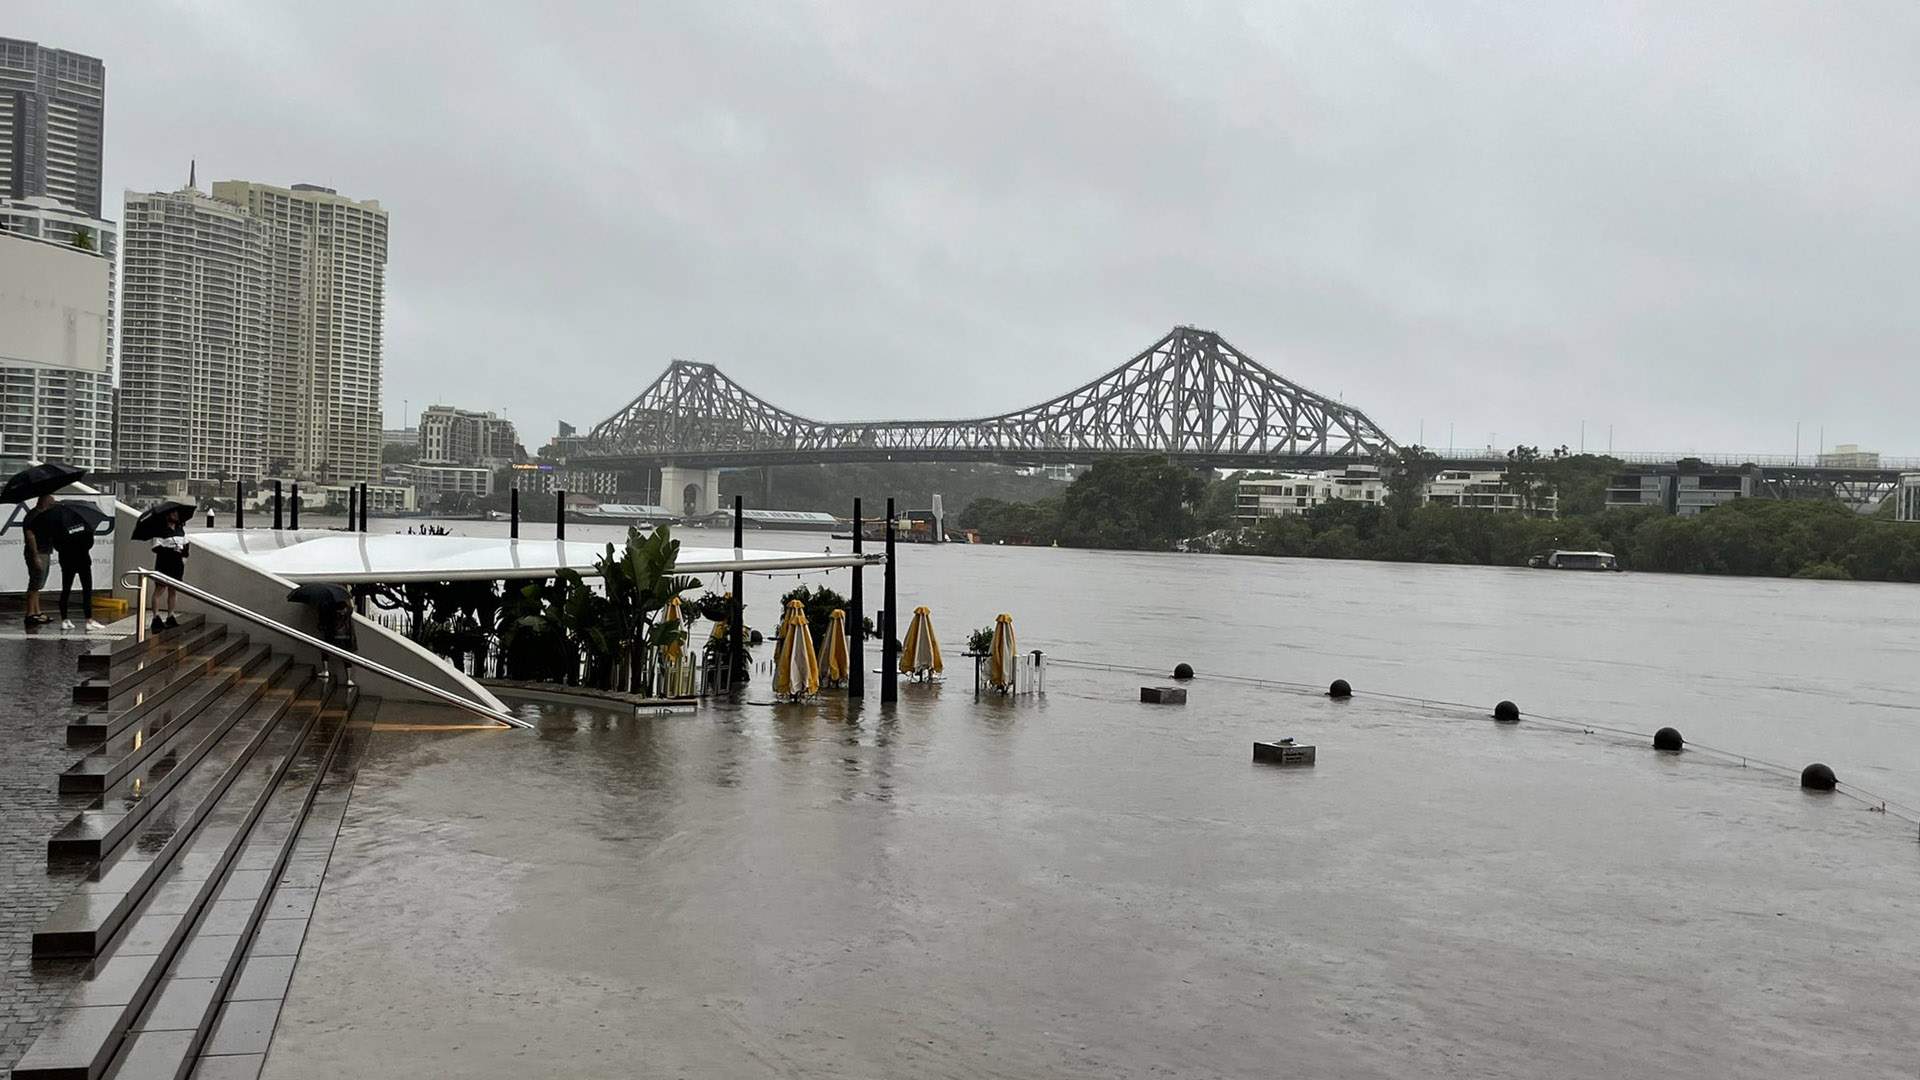 Brisbane's Mud Army Is Calling for Help Cleaning Up Homes and Businesses Affected by the Flood